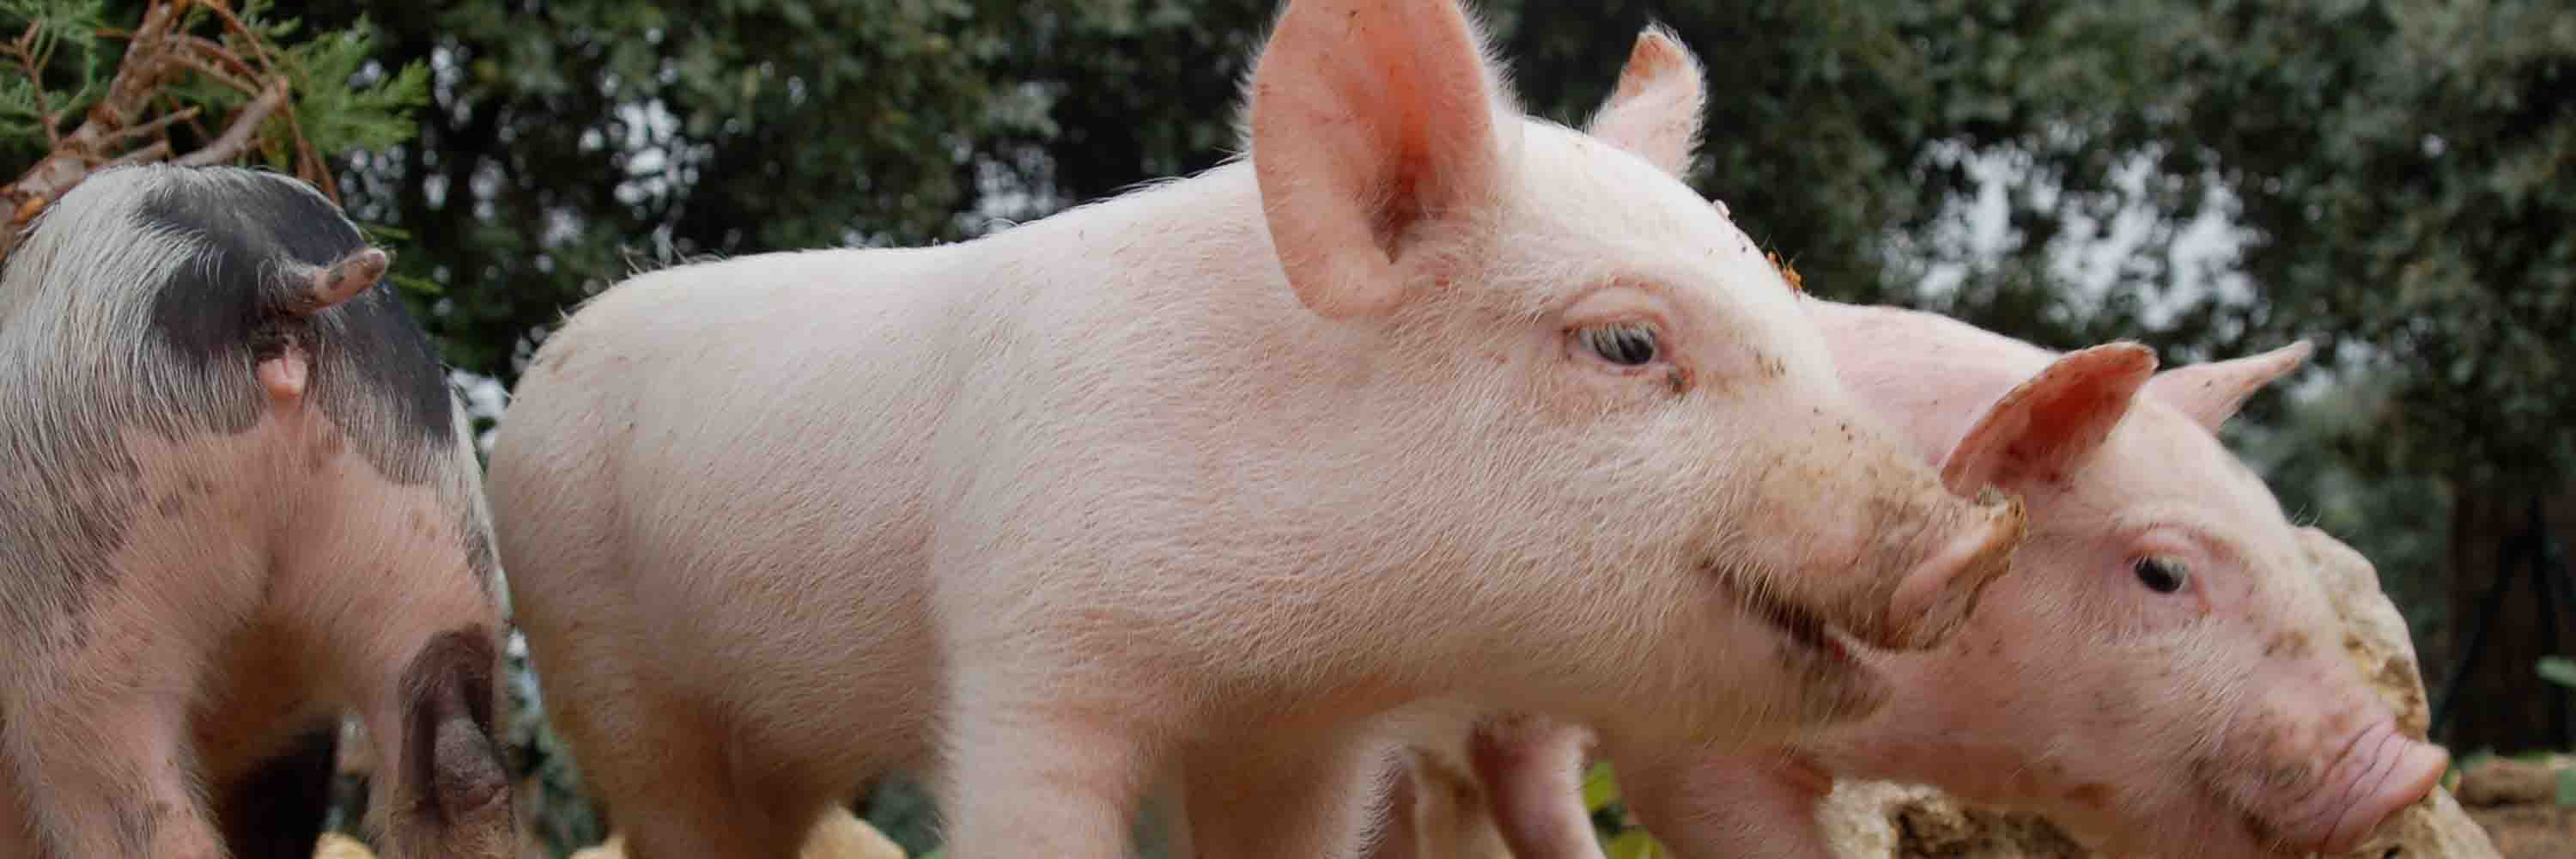 Piglets rescued from a factory farm enjoying life outdoors